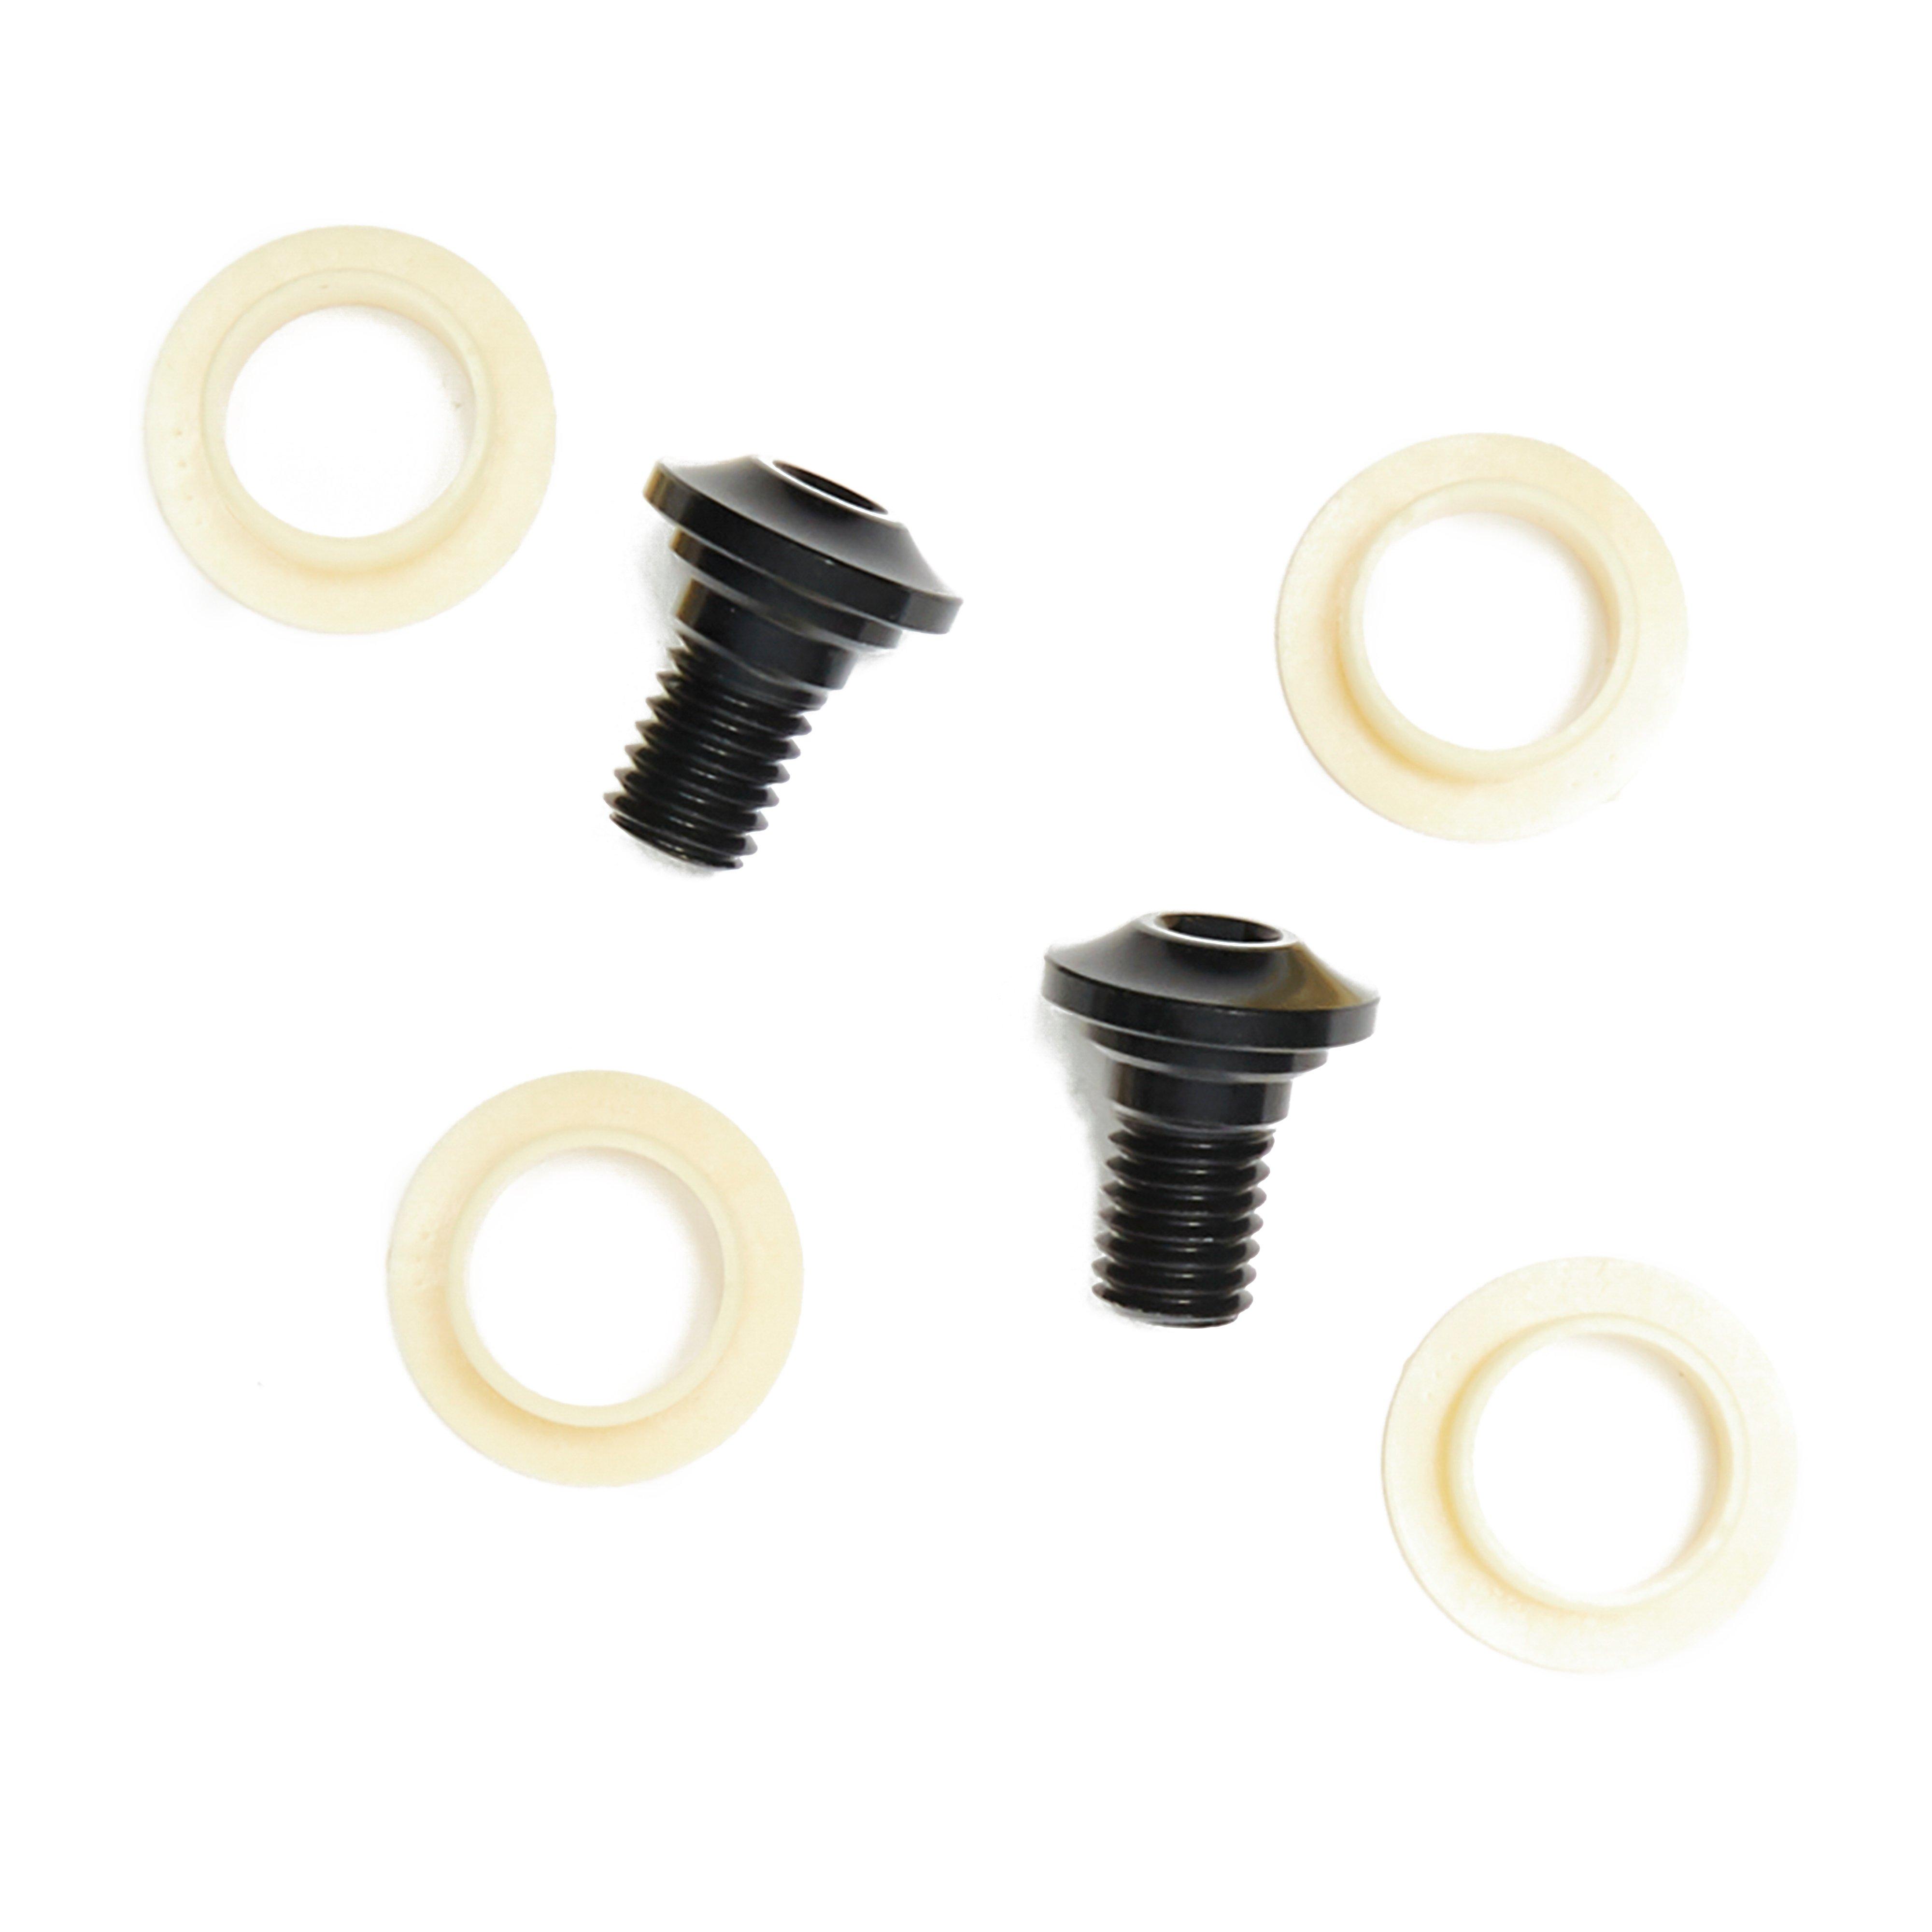 Calibre Sentry Kit 06, Chainstay-seatstay Bolts and Bushings Review